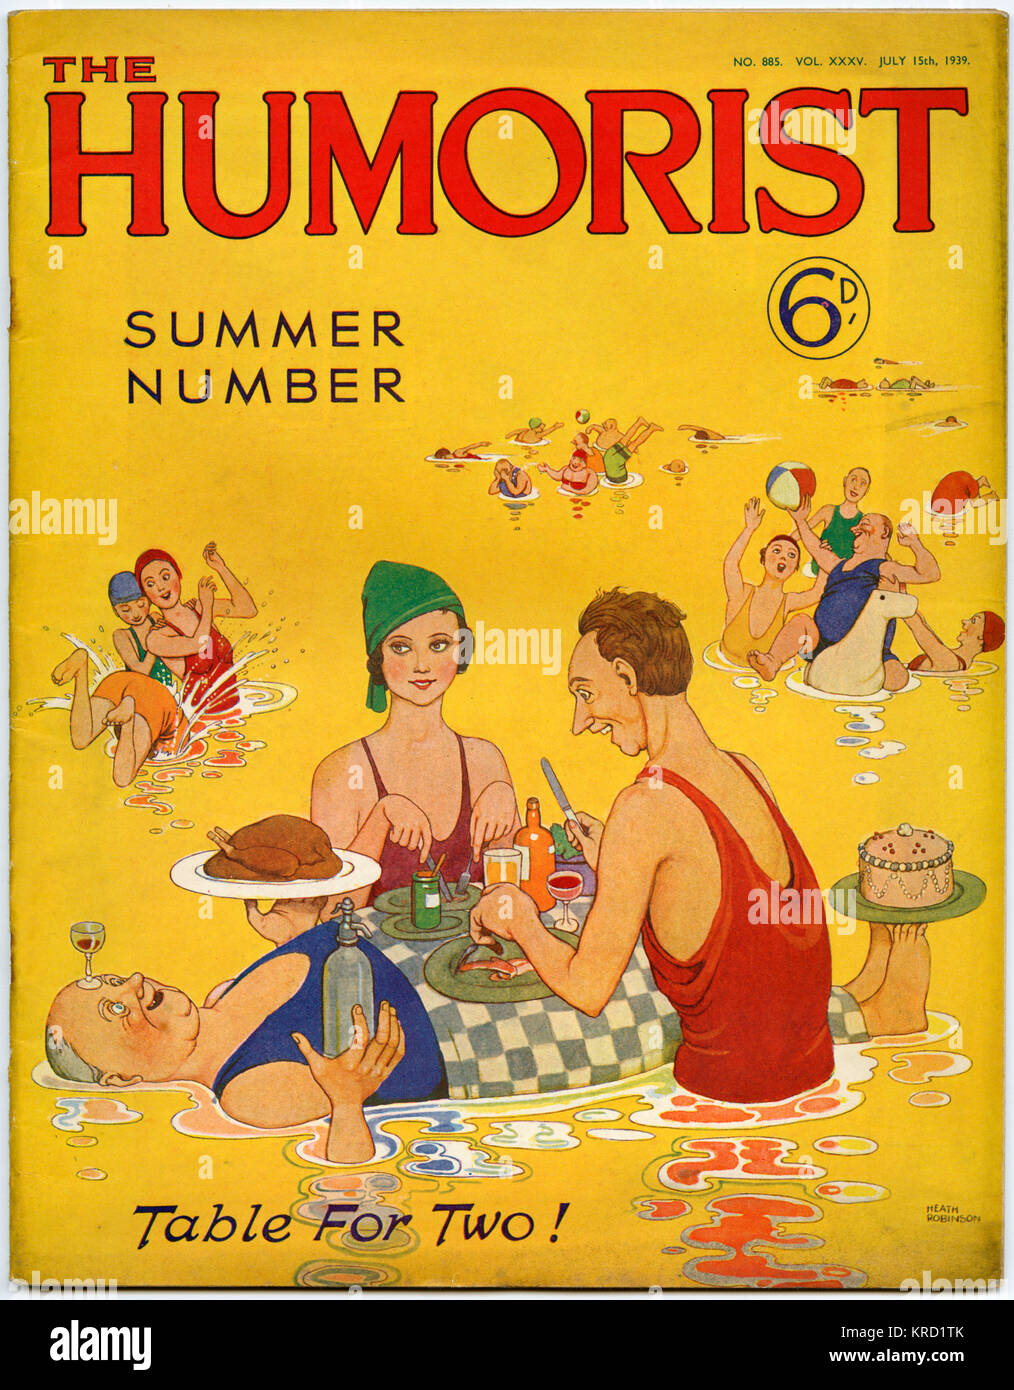 Bright and jolly front cover design for The Humorist magazine Summer Number by William Heath Robinson featuring a number of bathers paddling and playing about in the sea.  One particular couple have had the ingenious idea of using a rotund and therefore very buoyant friend as a makeshift dining table for their picnic.     Date: 1939 Stock Photo